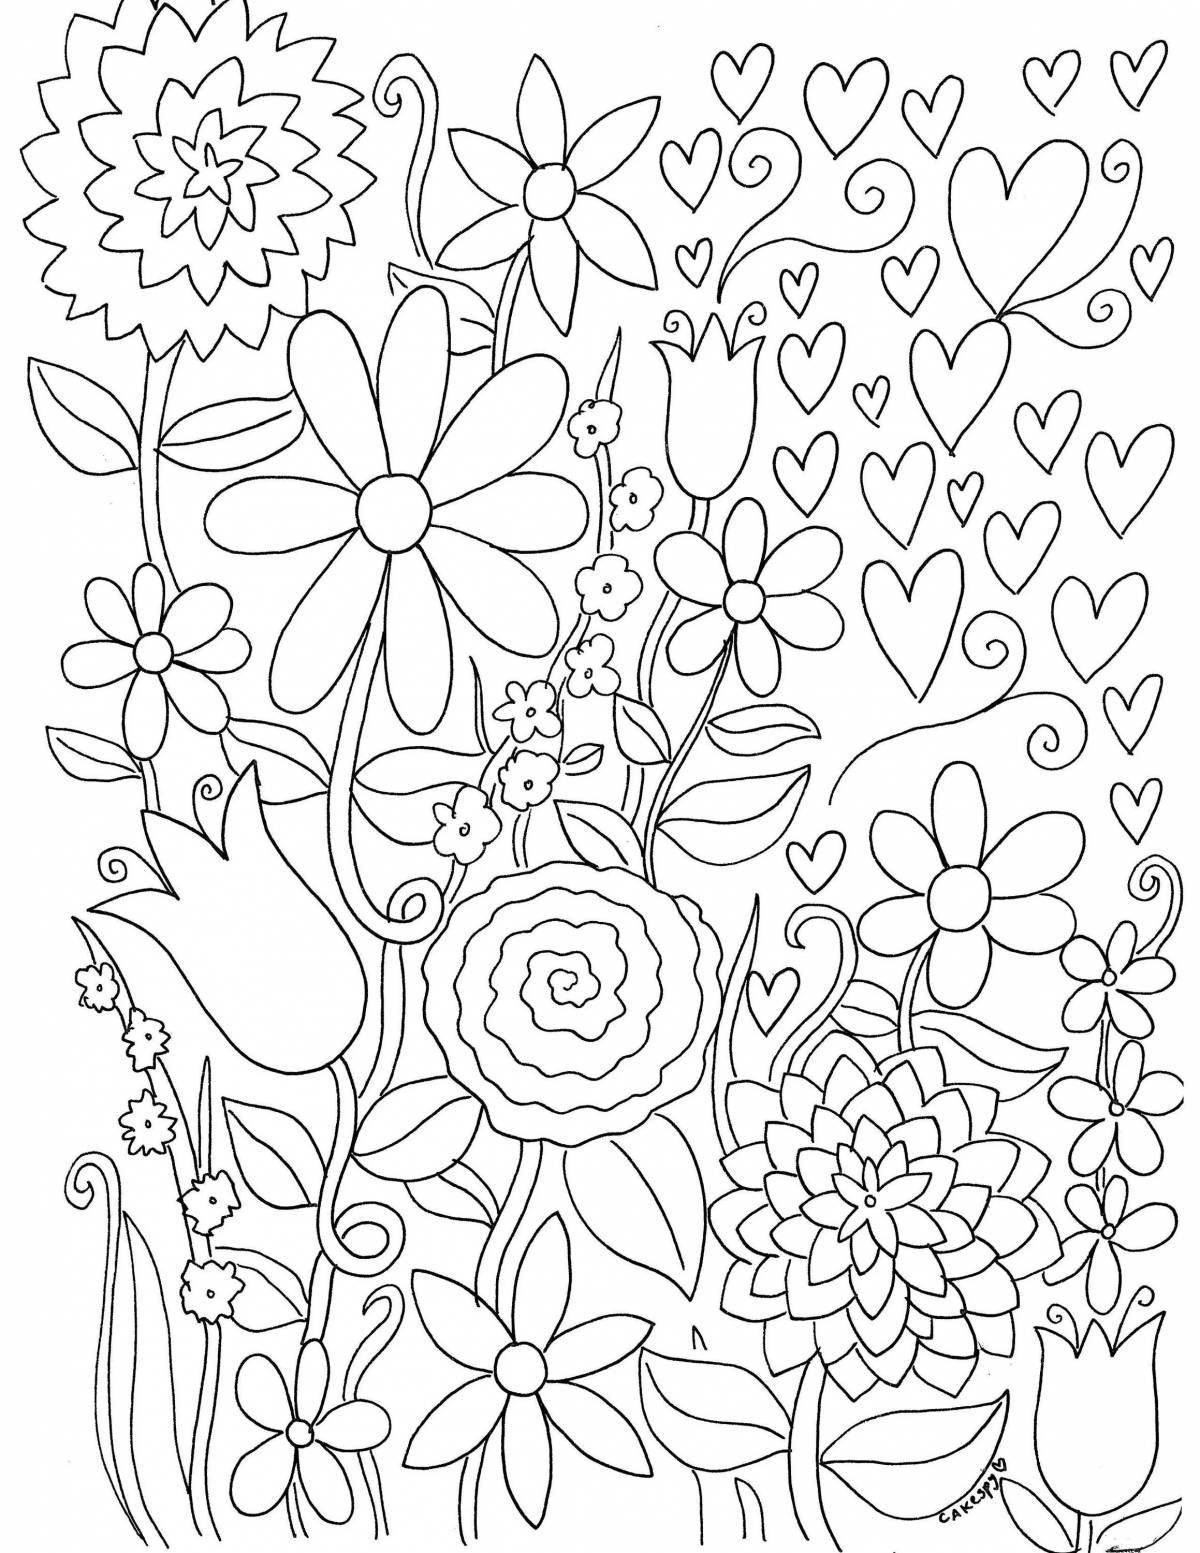 Gorgeous patterns and ornaments for coloring for children